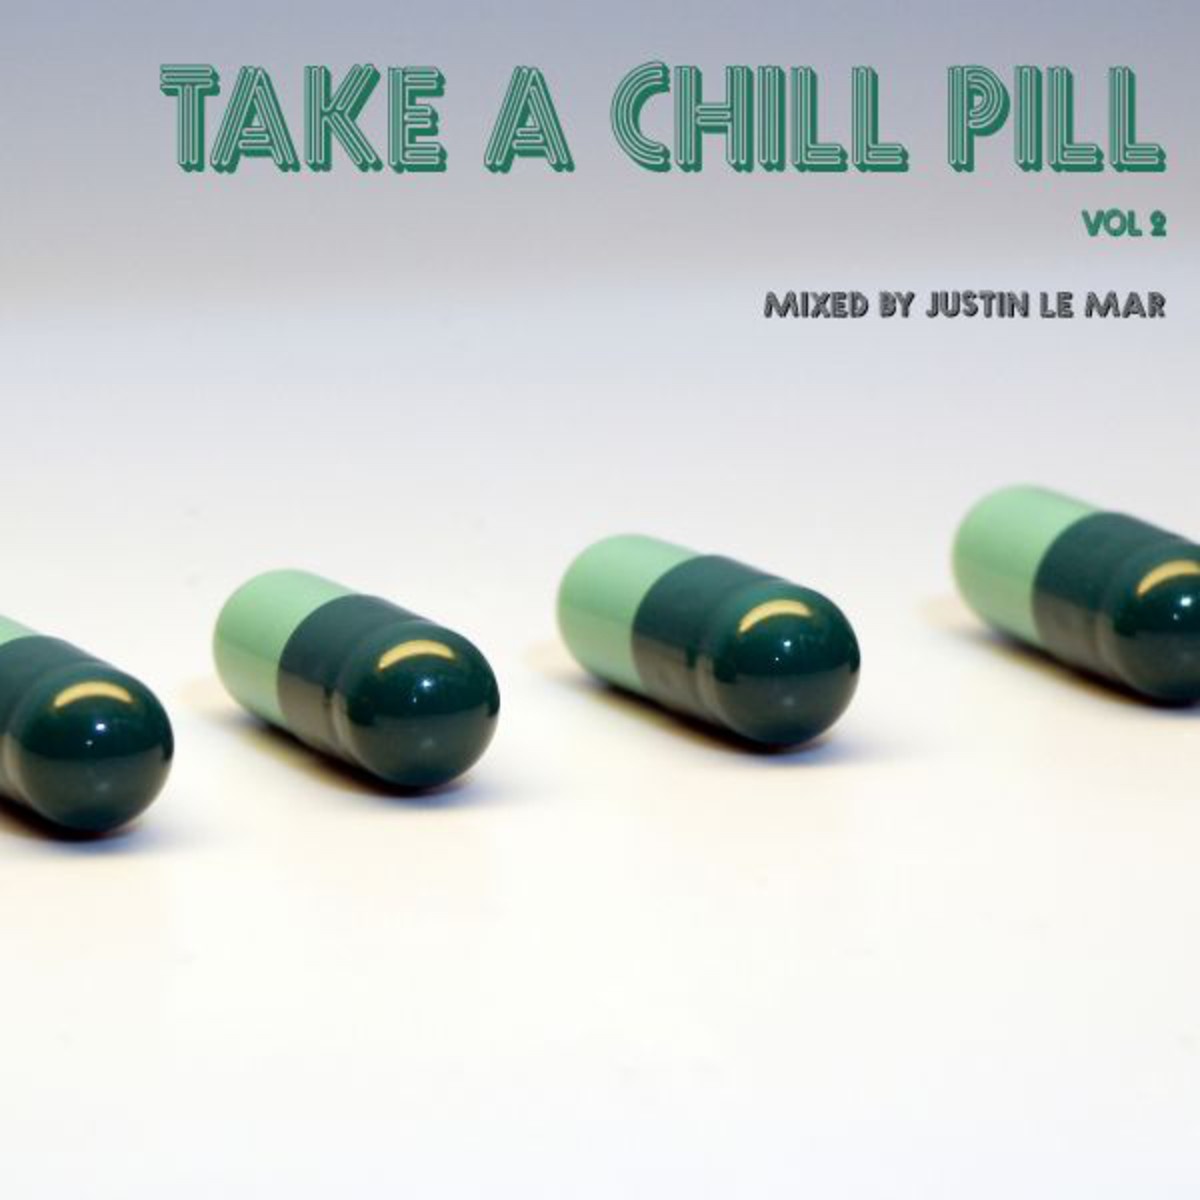 Take A Chill Pill Vol. 2 - Mixed by Justin Le Mar